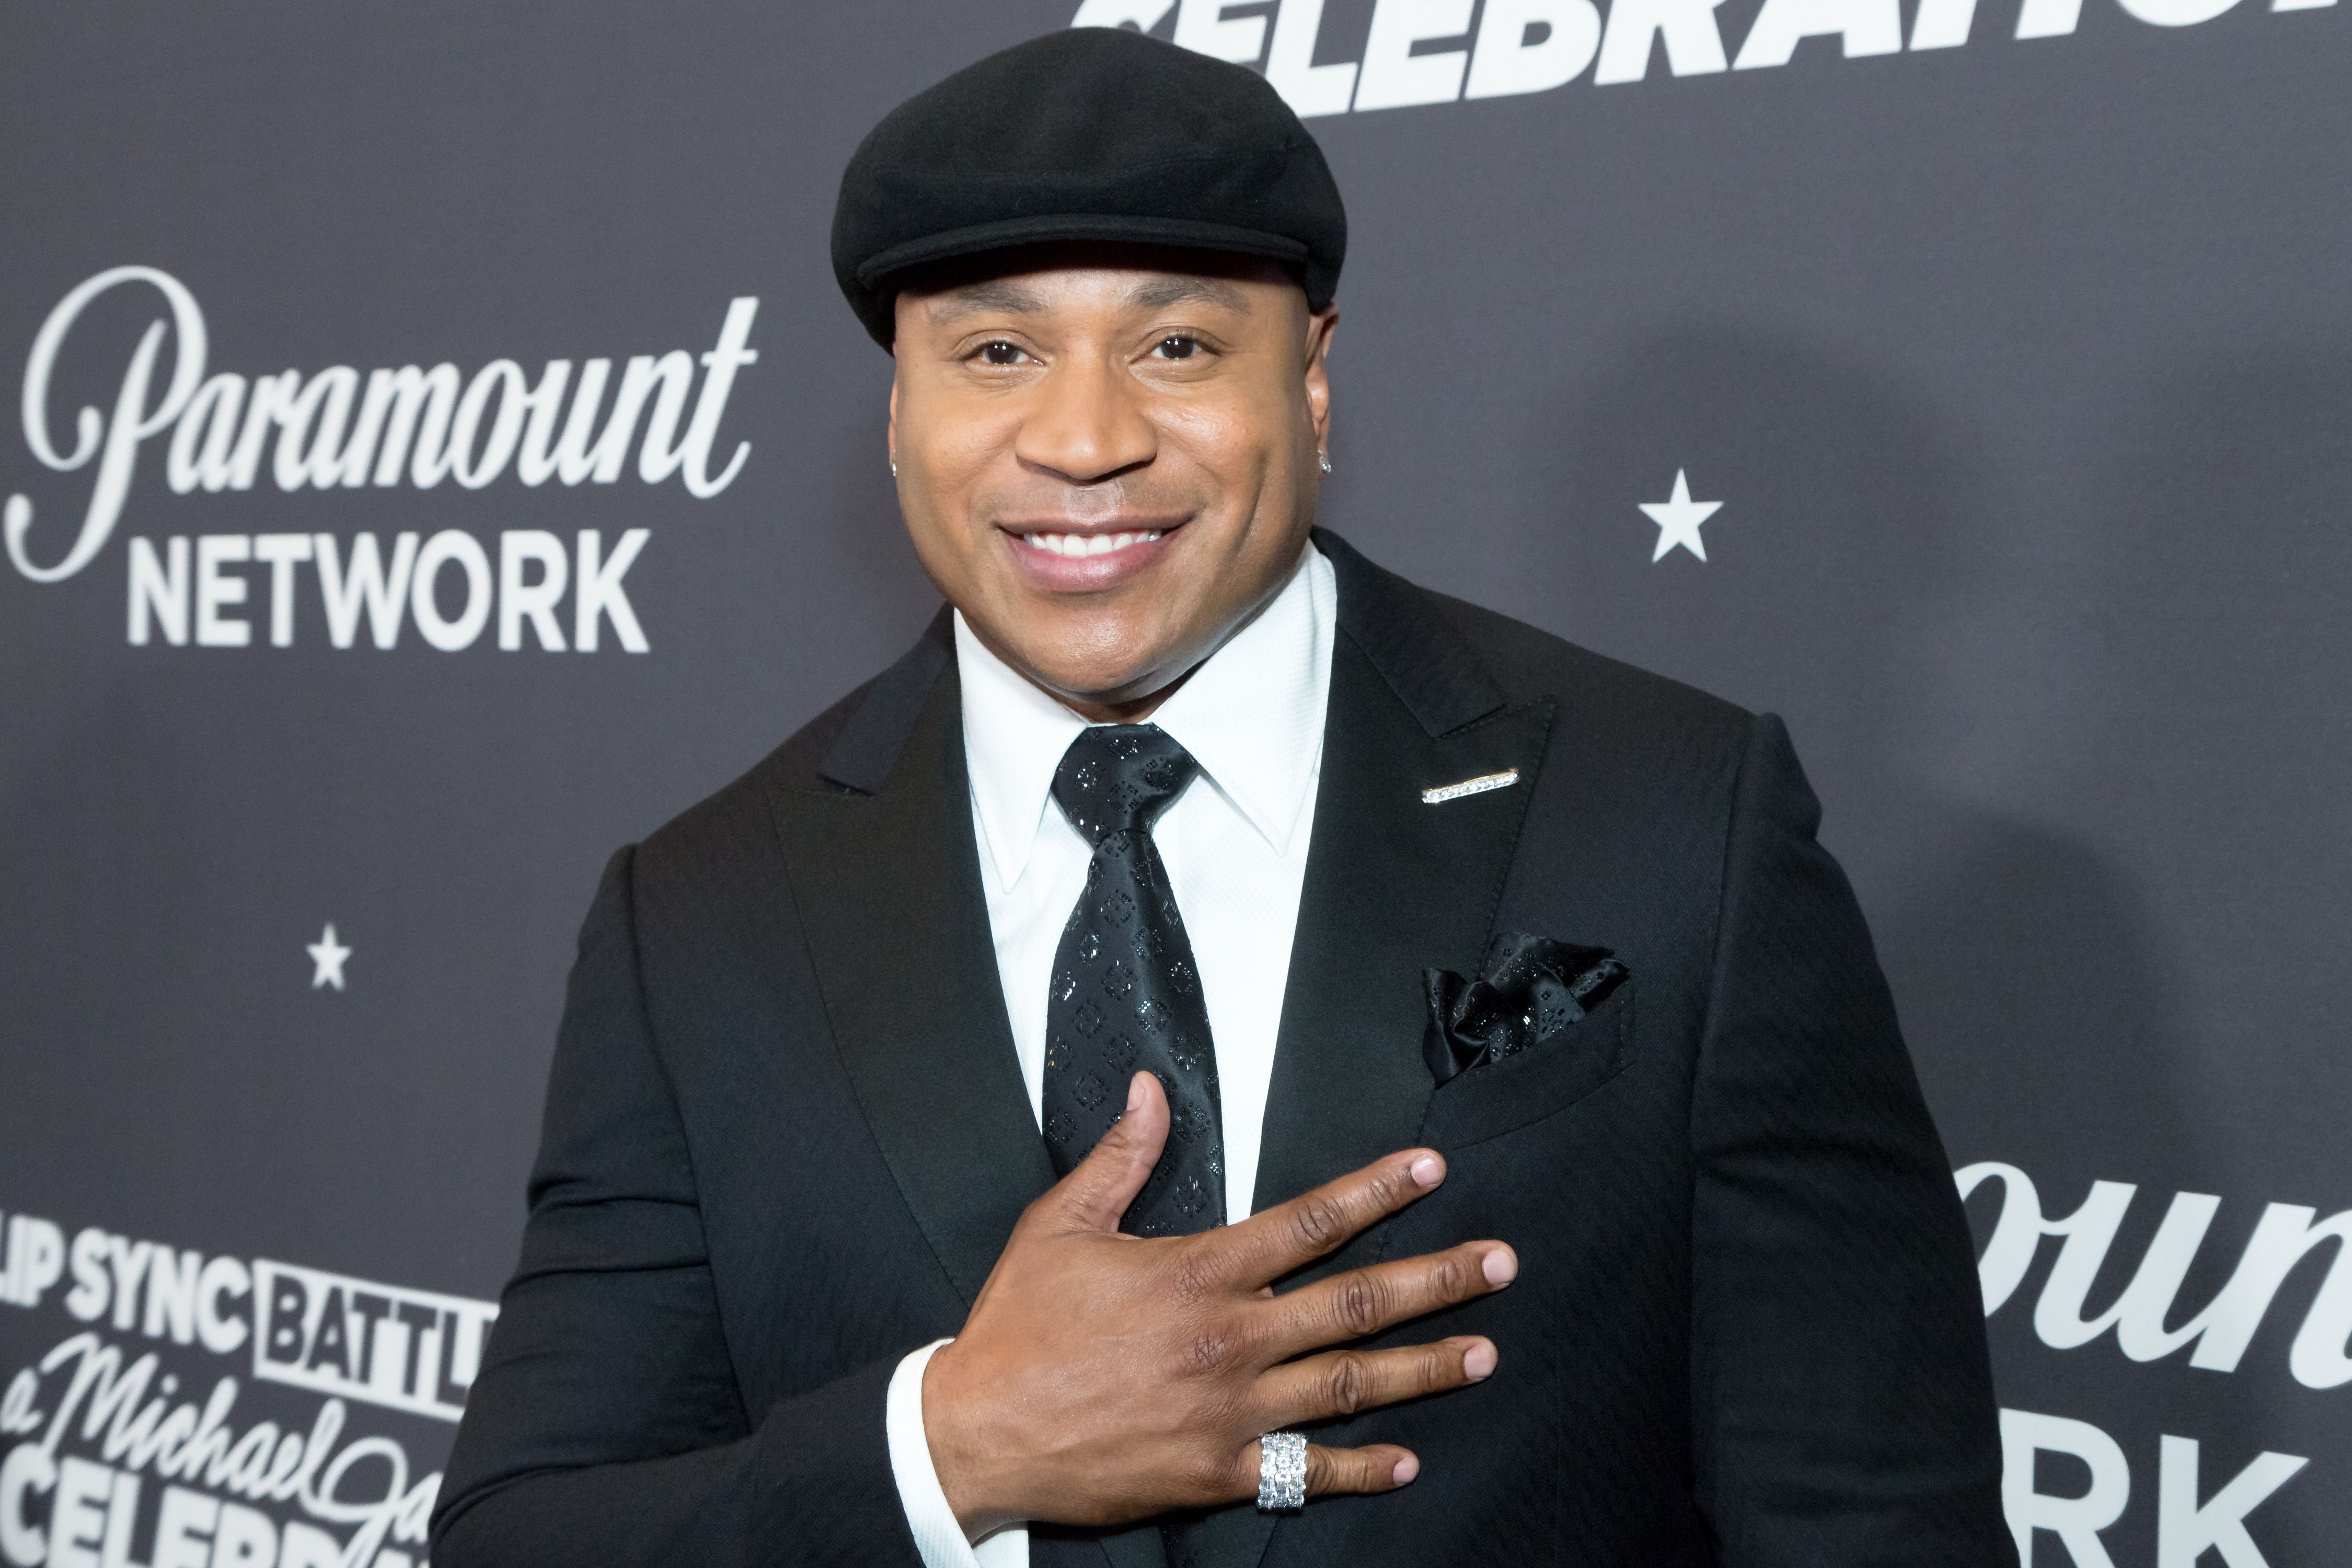  LL Cool J attends the Lip Sync Battle LIVE: A Michael Jackson Celebration at Dolby Theatre on January 18, 2018. | Photo: Getty Images